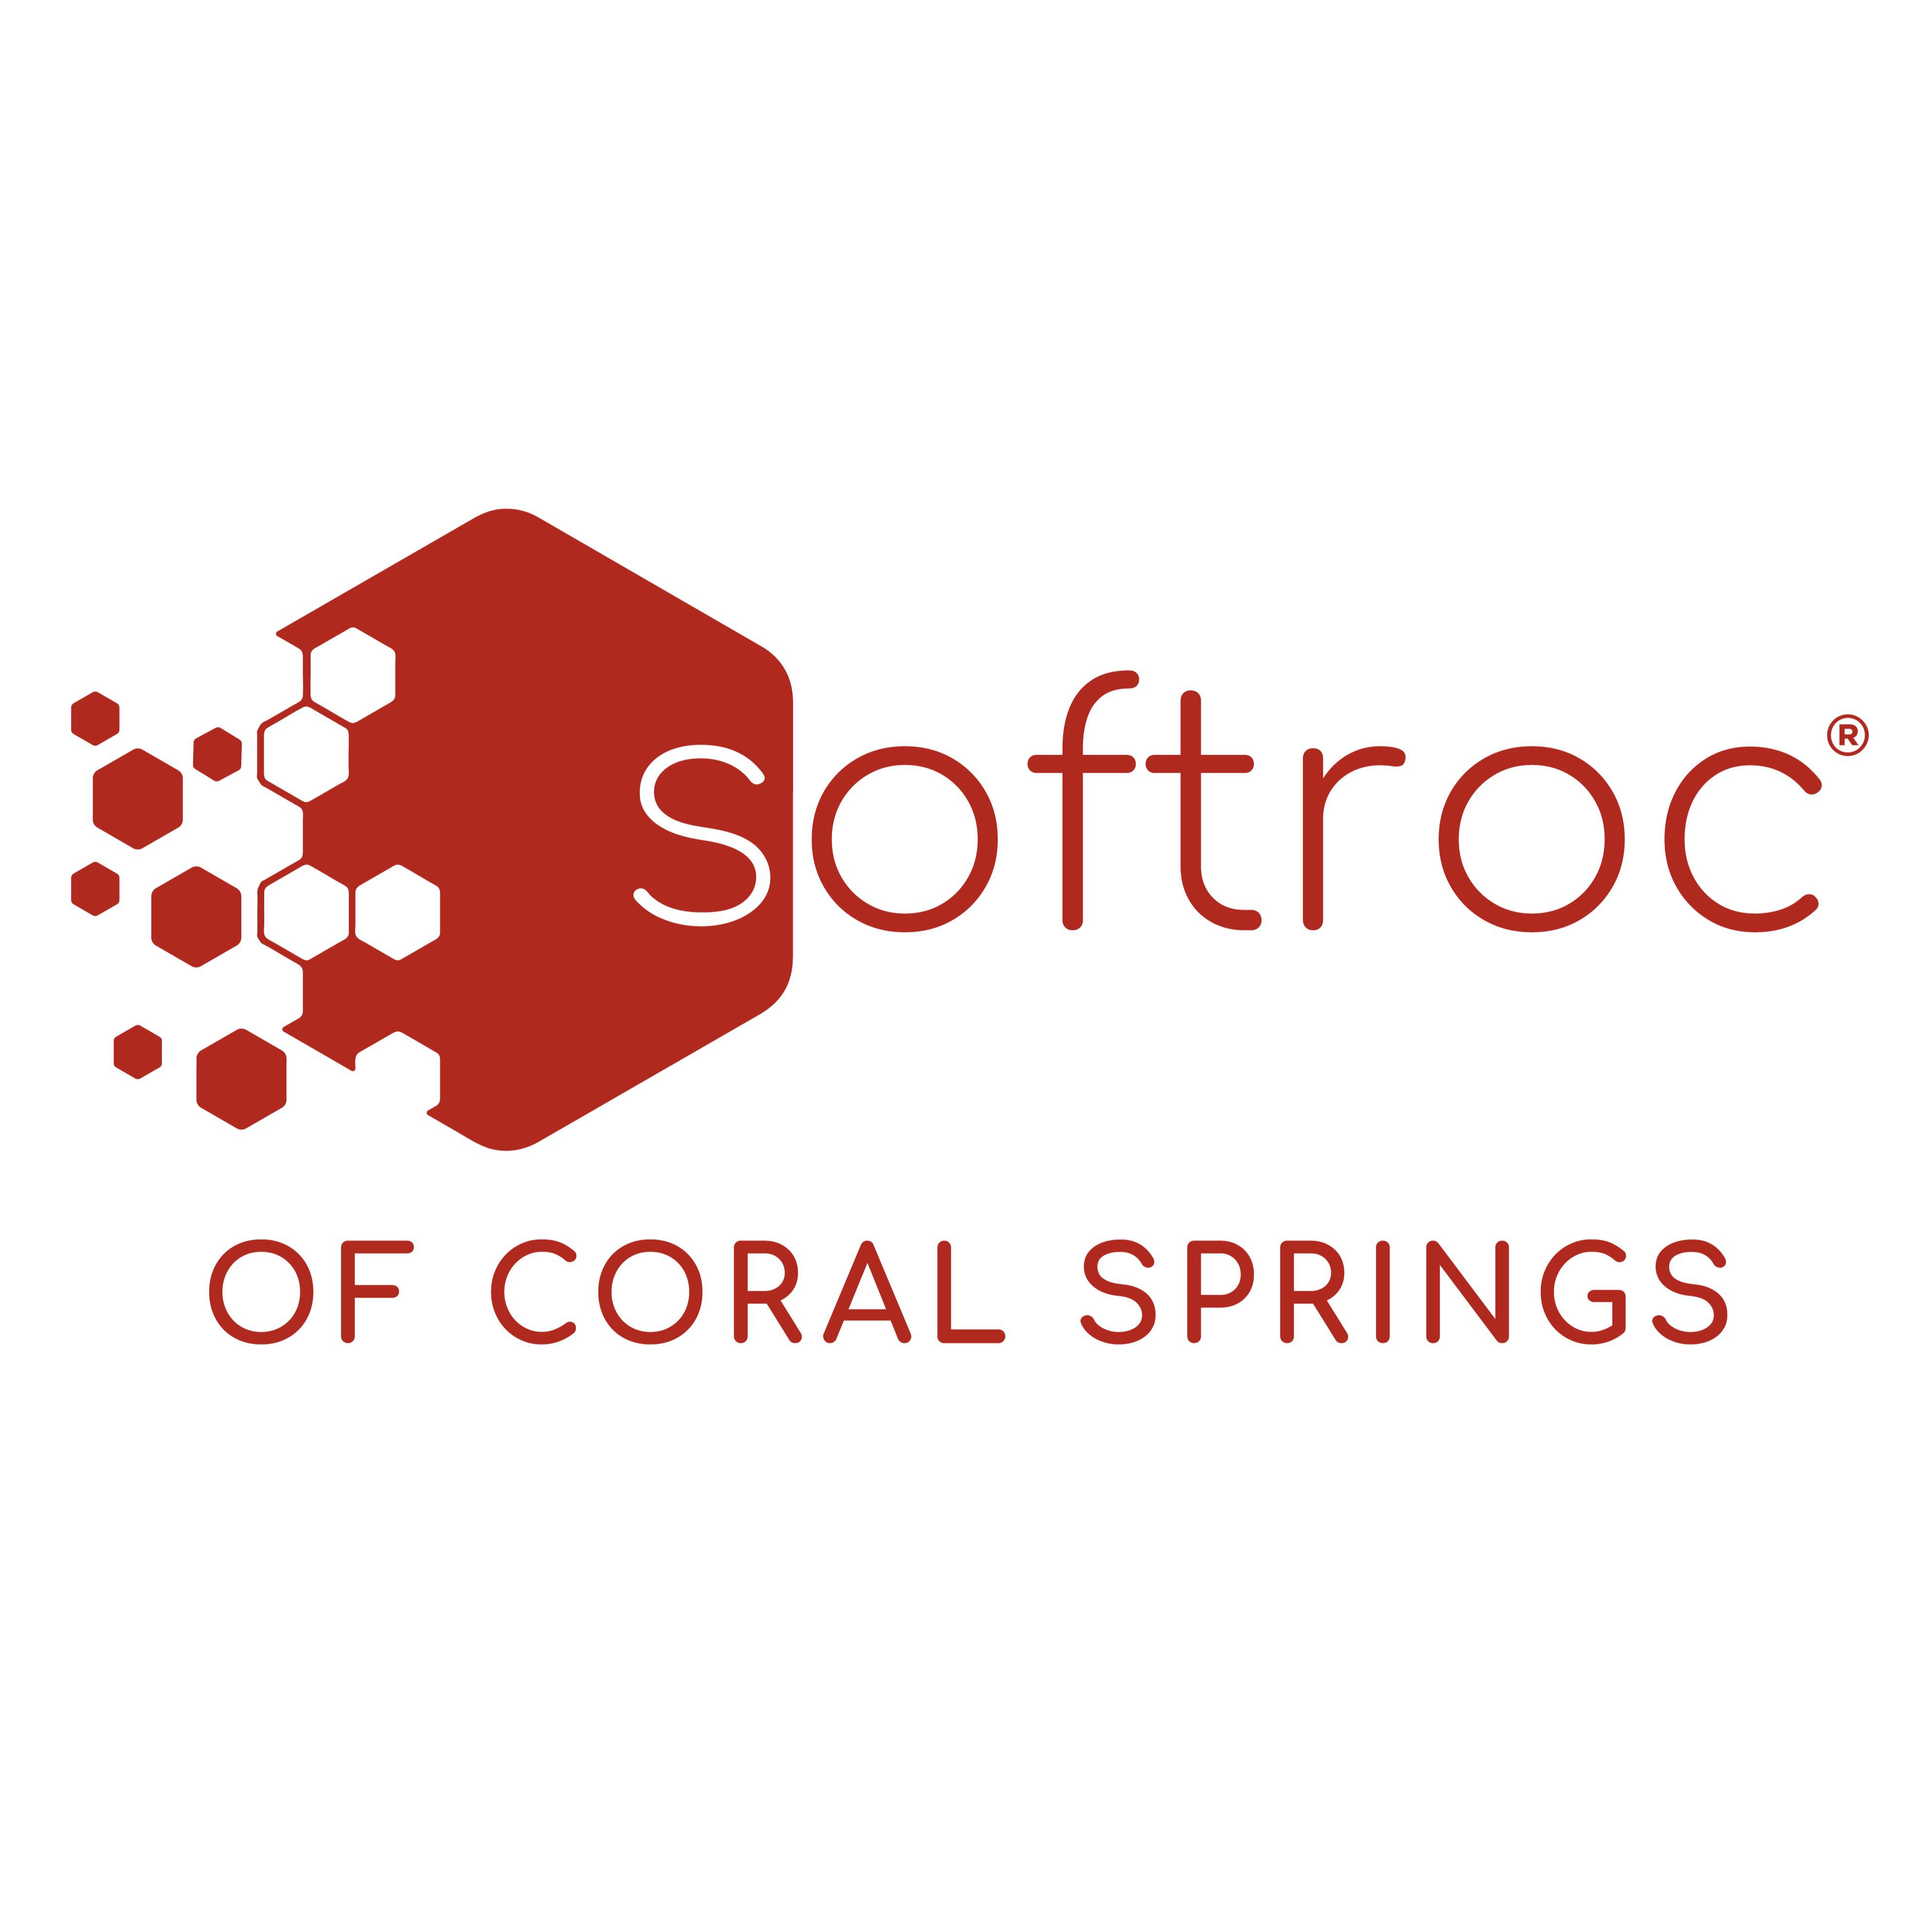 Softroc of Coral Springs